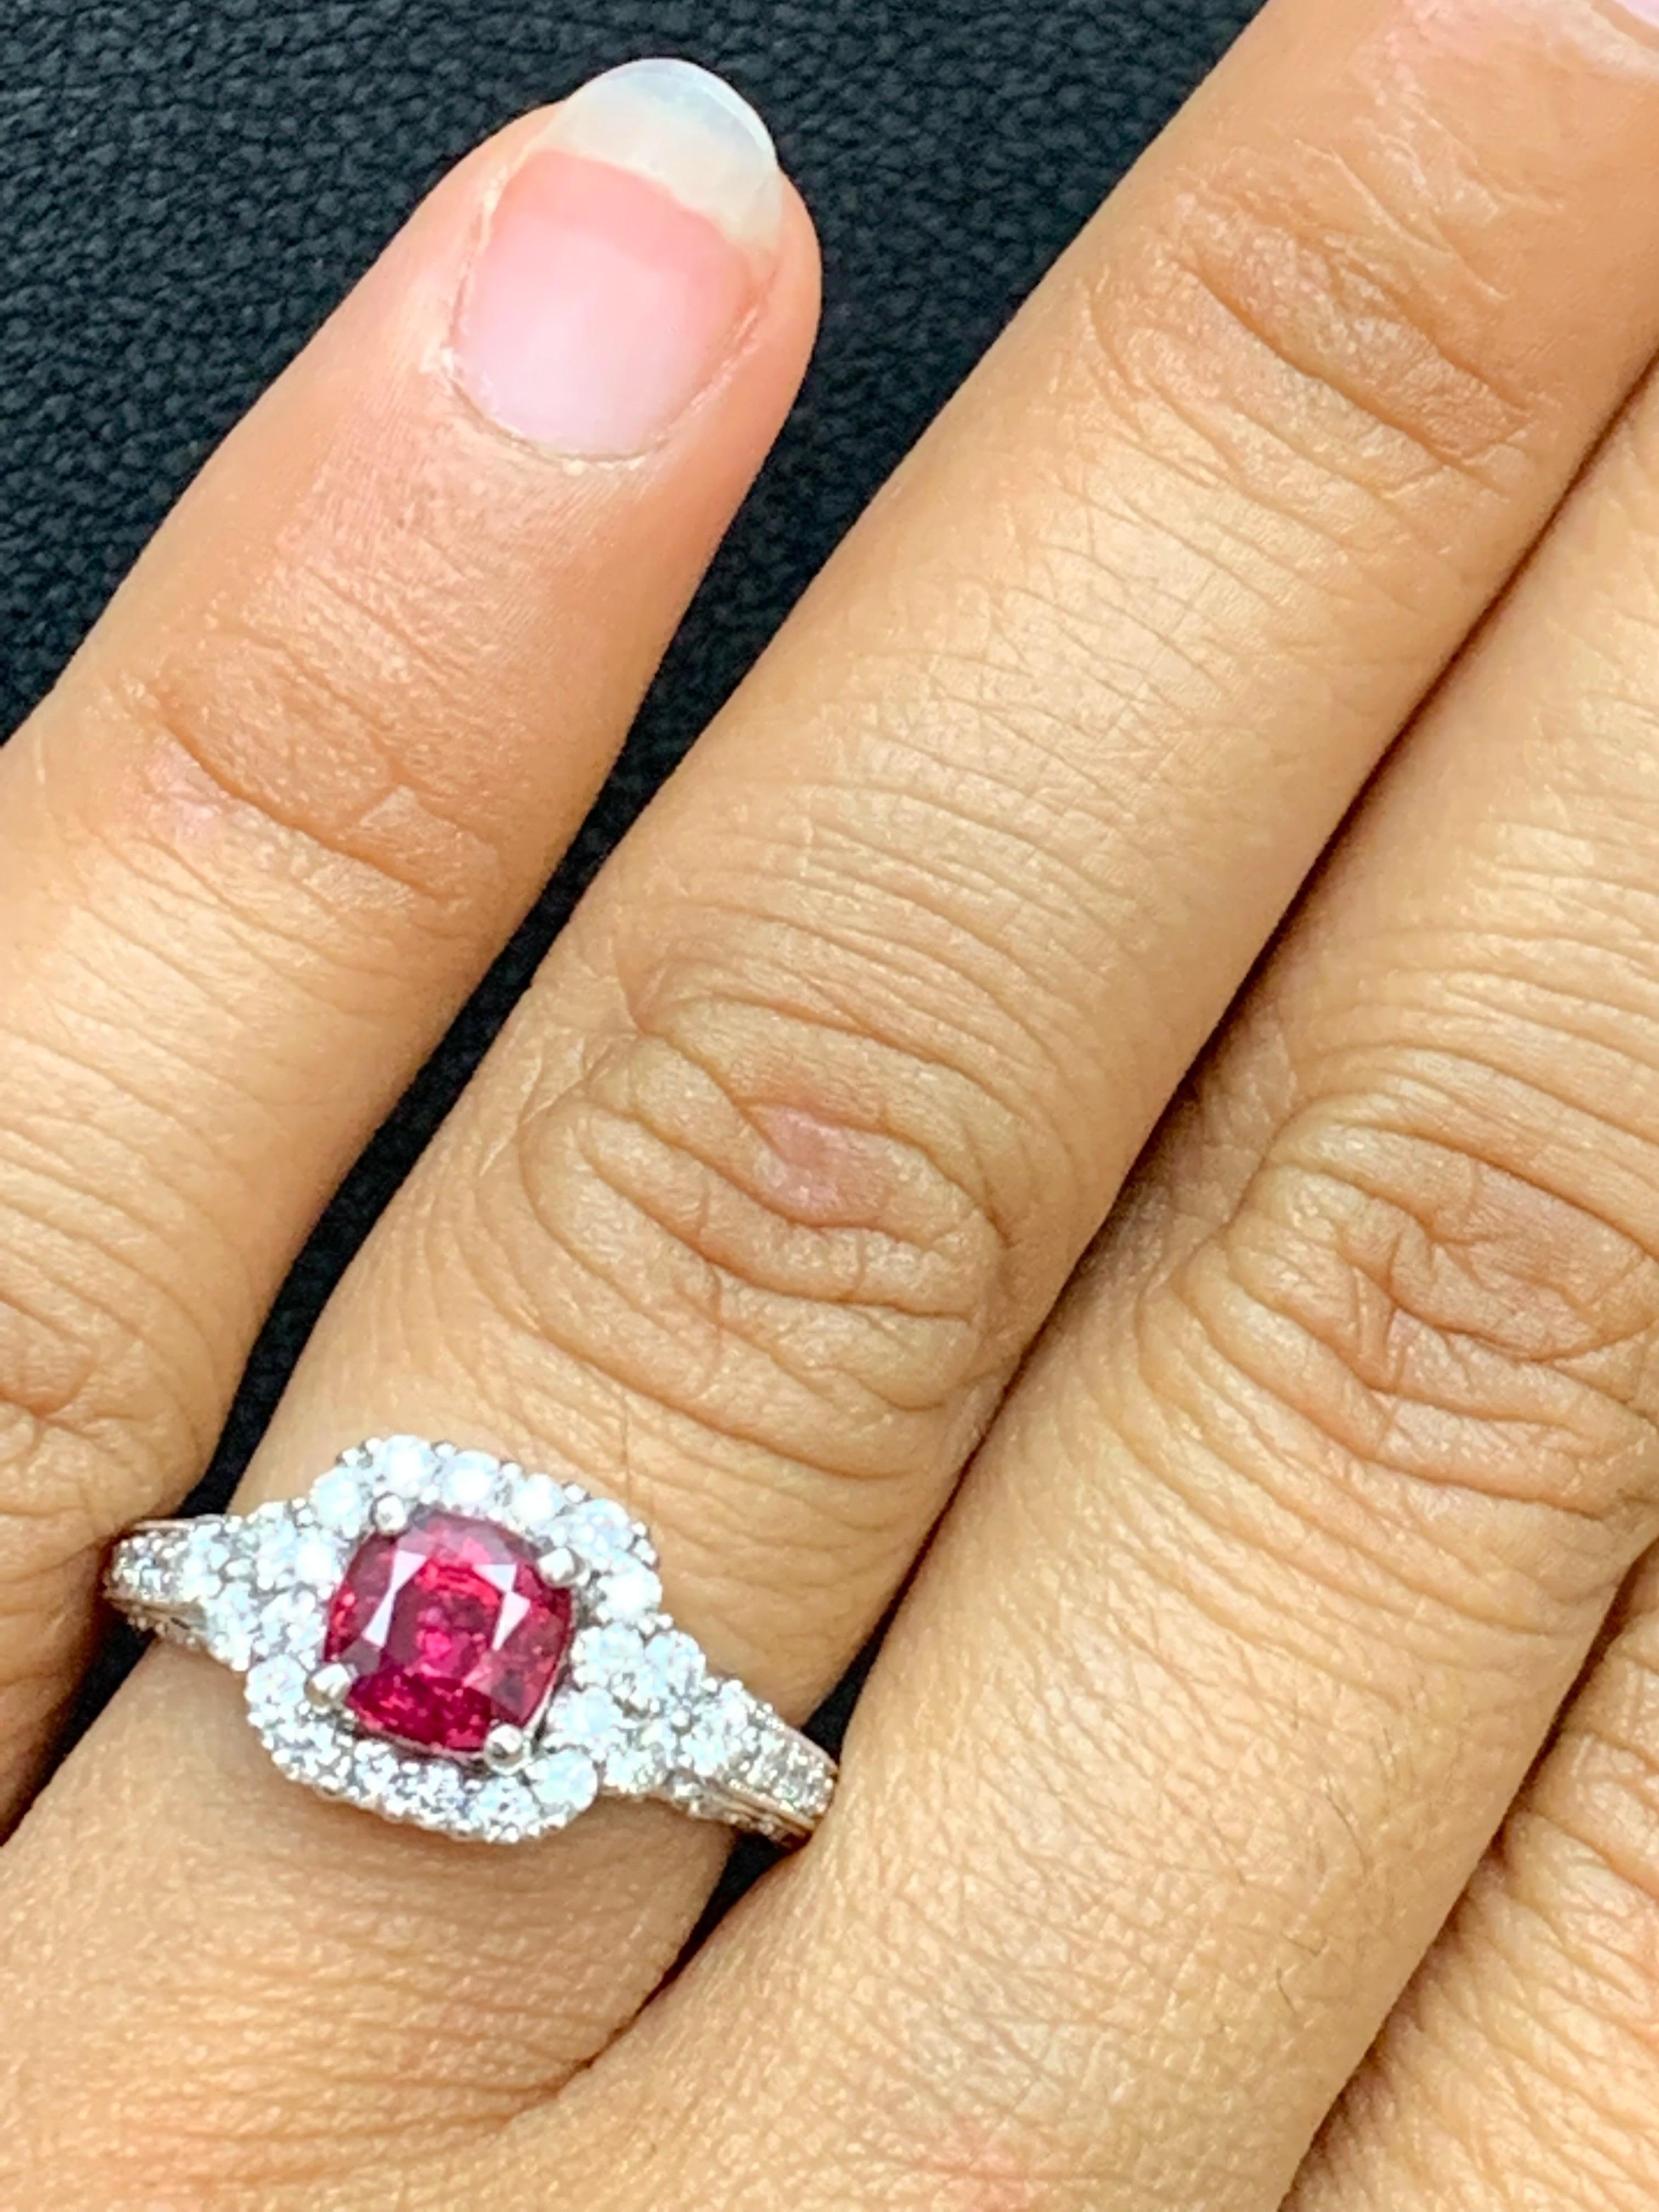 A vibrant 1.07-carat cushion cut natural ruby takes center stage as it elegantly contrasts the sparkling diamonds around it. Set in a chic shank setting accented with rope design with more brilliant diamonds.  50 Diamonds weigh 0.74 carats in total.